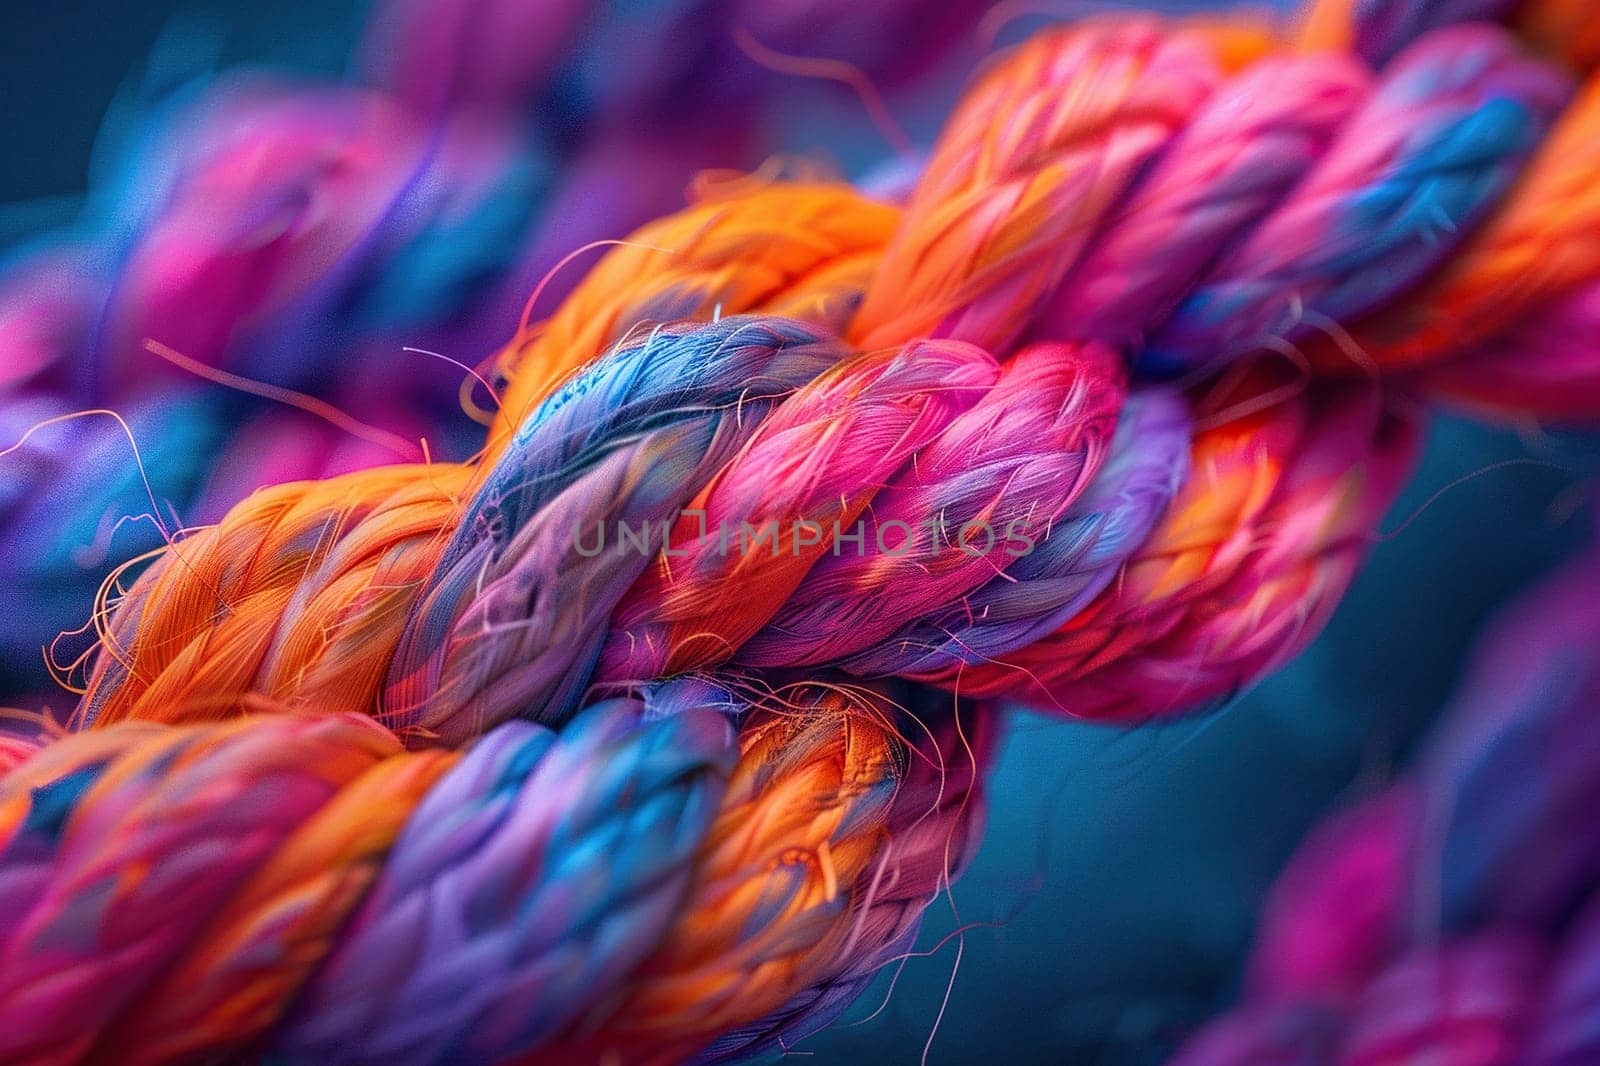 Macro image of a multi-colored rope with fibers on a blue background.